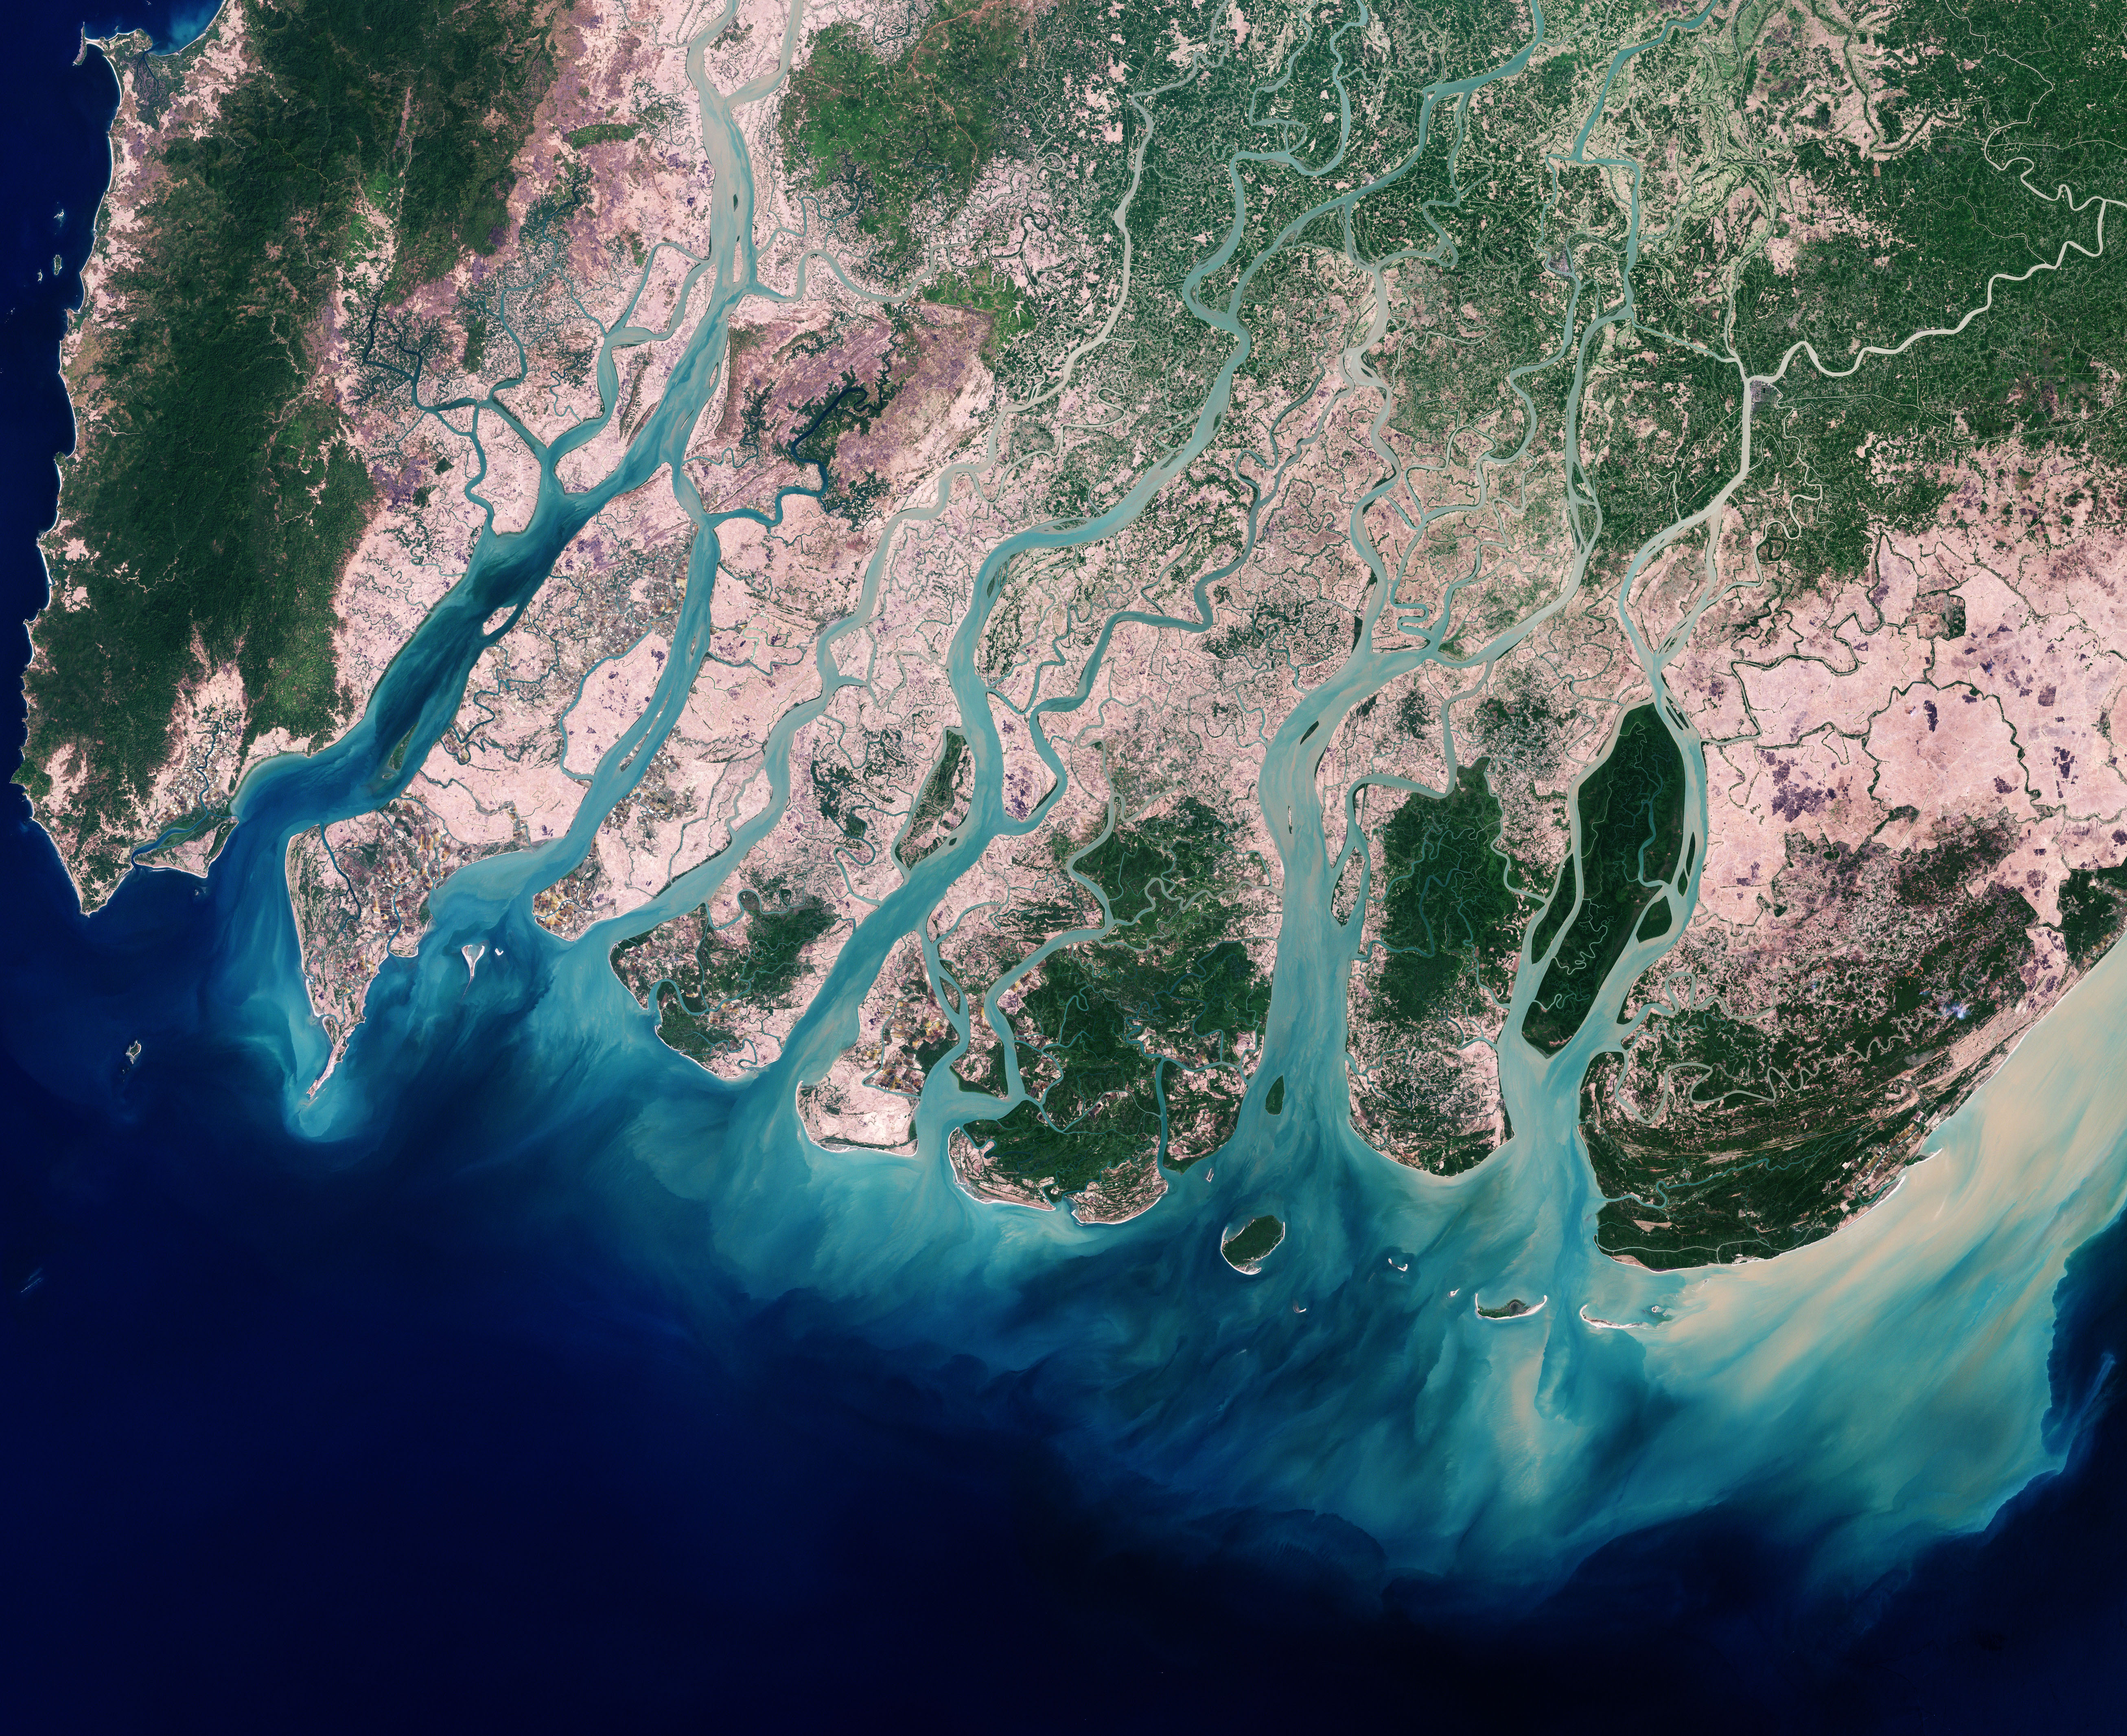 Irrawaddy Delta, Burma - related image preview